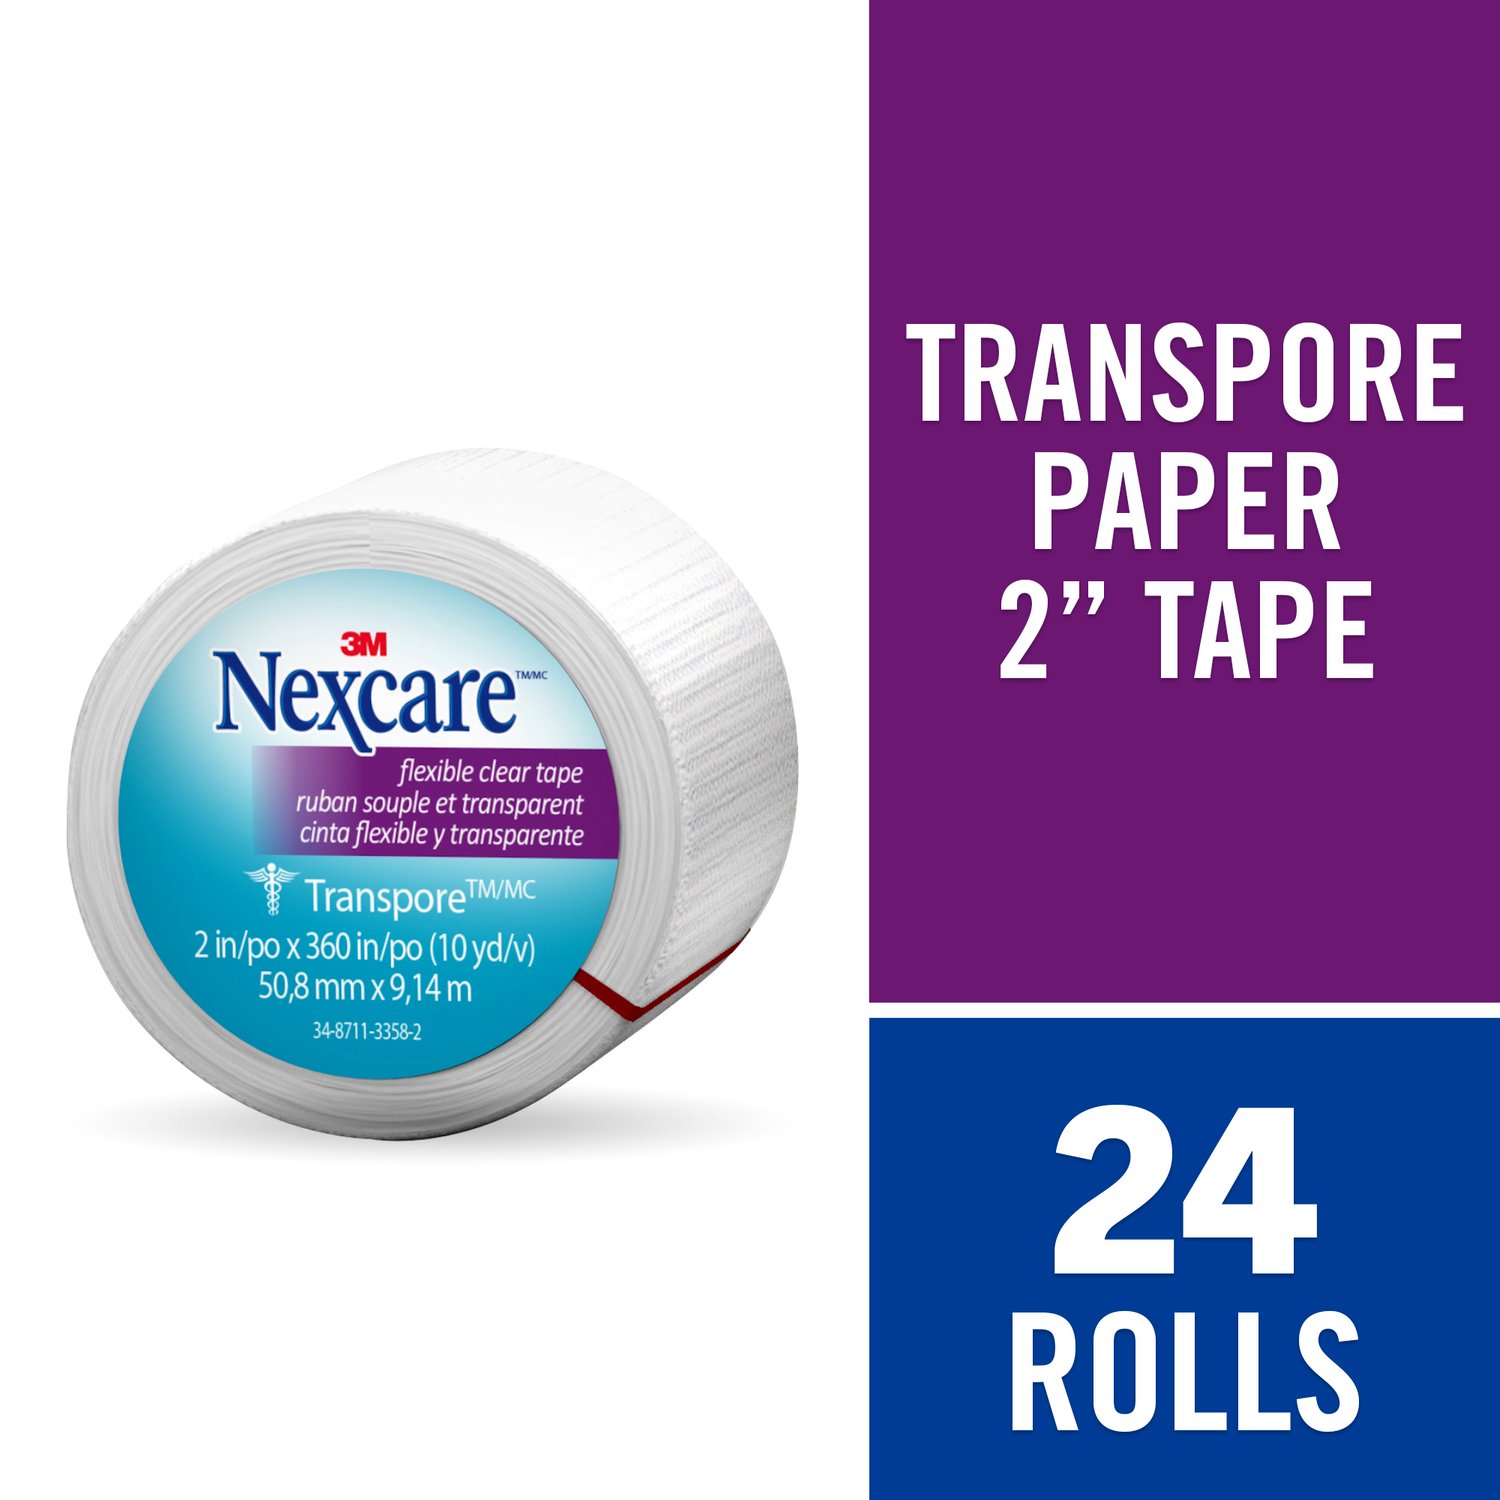 7000052482 - Nexcare Transpore Flexible Clear First Aid Tape 527-P2, 2 in x 10 yds,
Wrapped